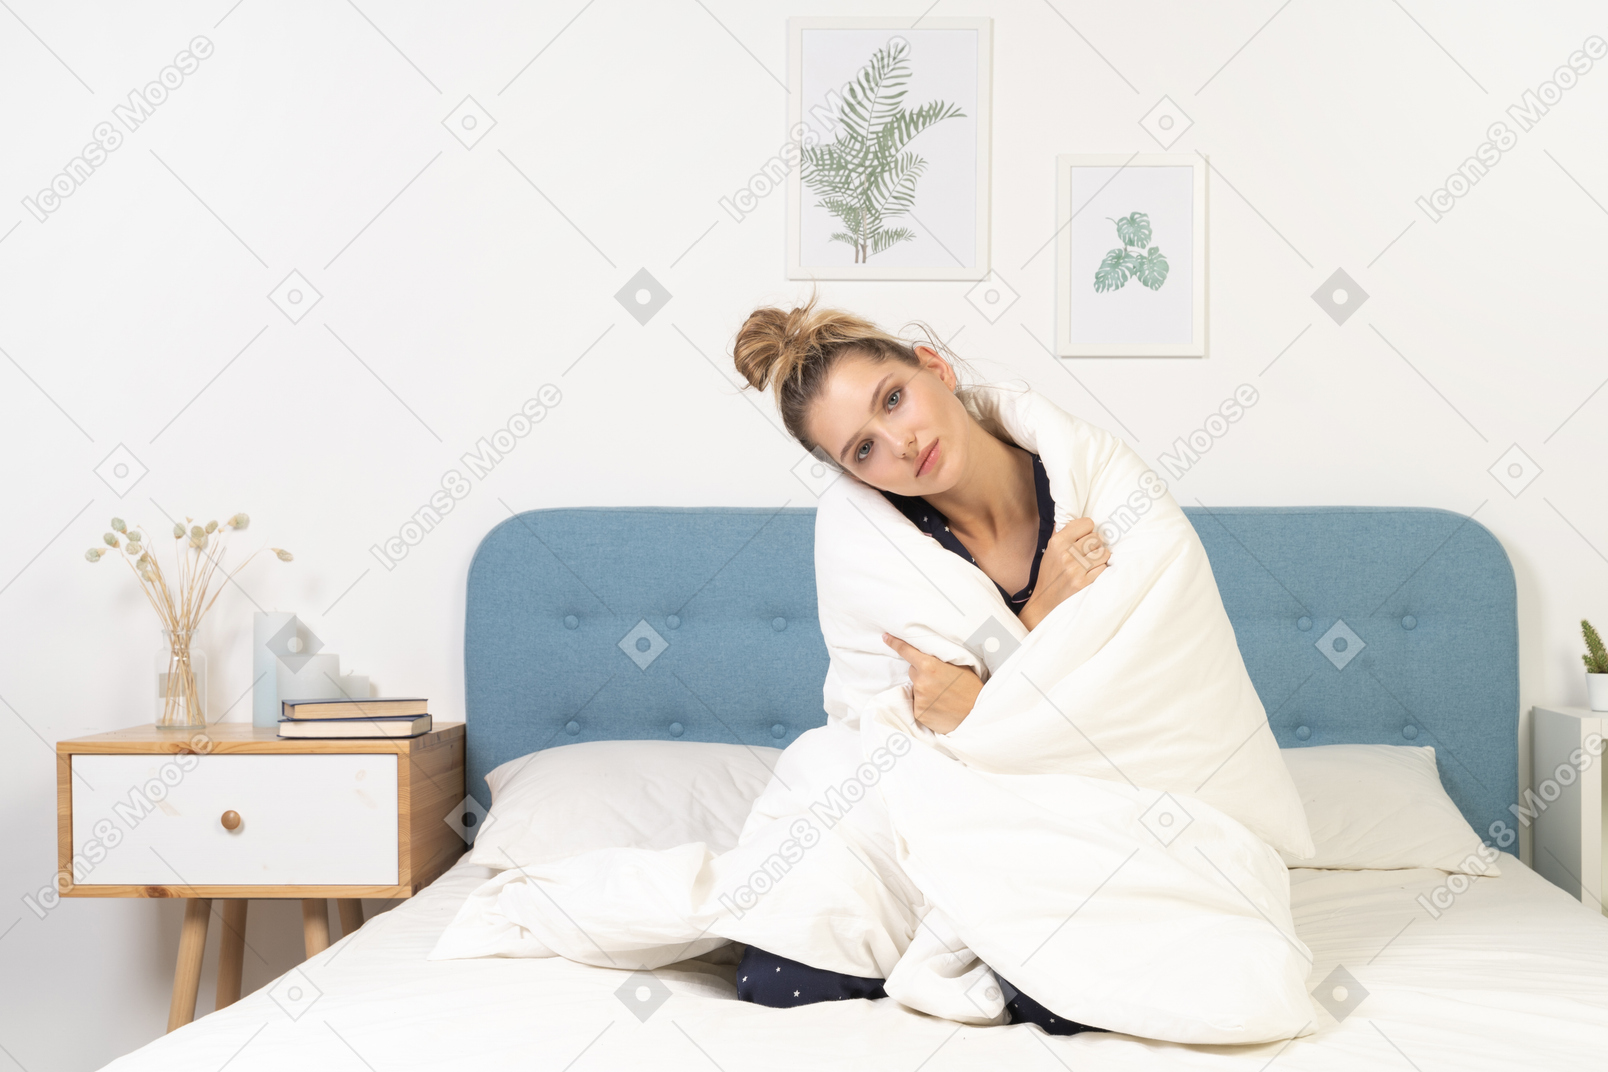 Front view of a tired young woman in pajamas wrapped in blanket staying in bed